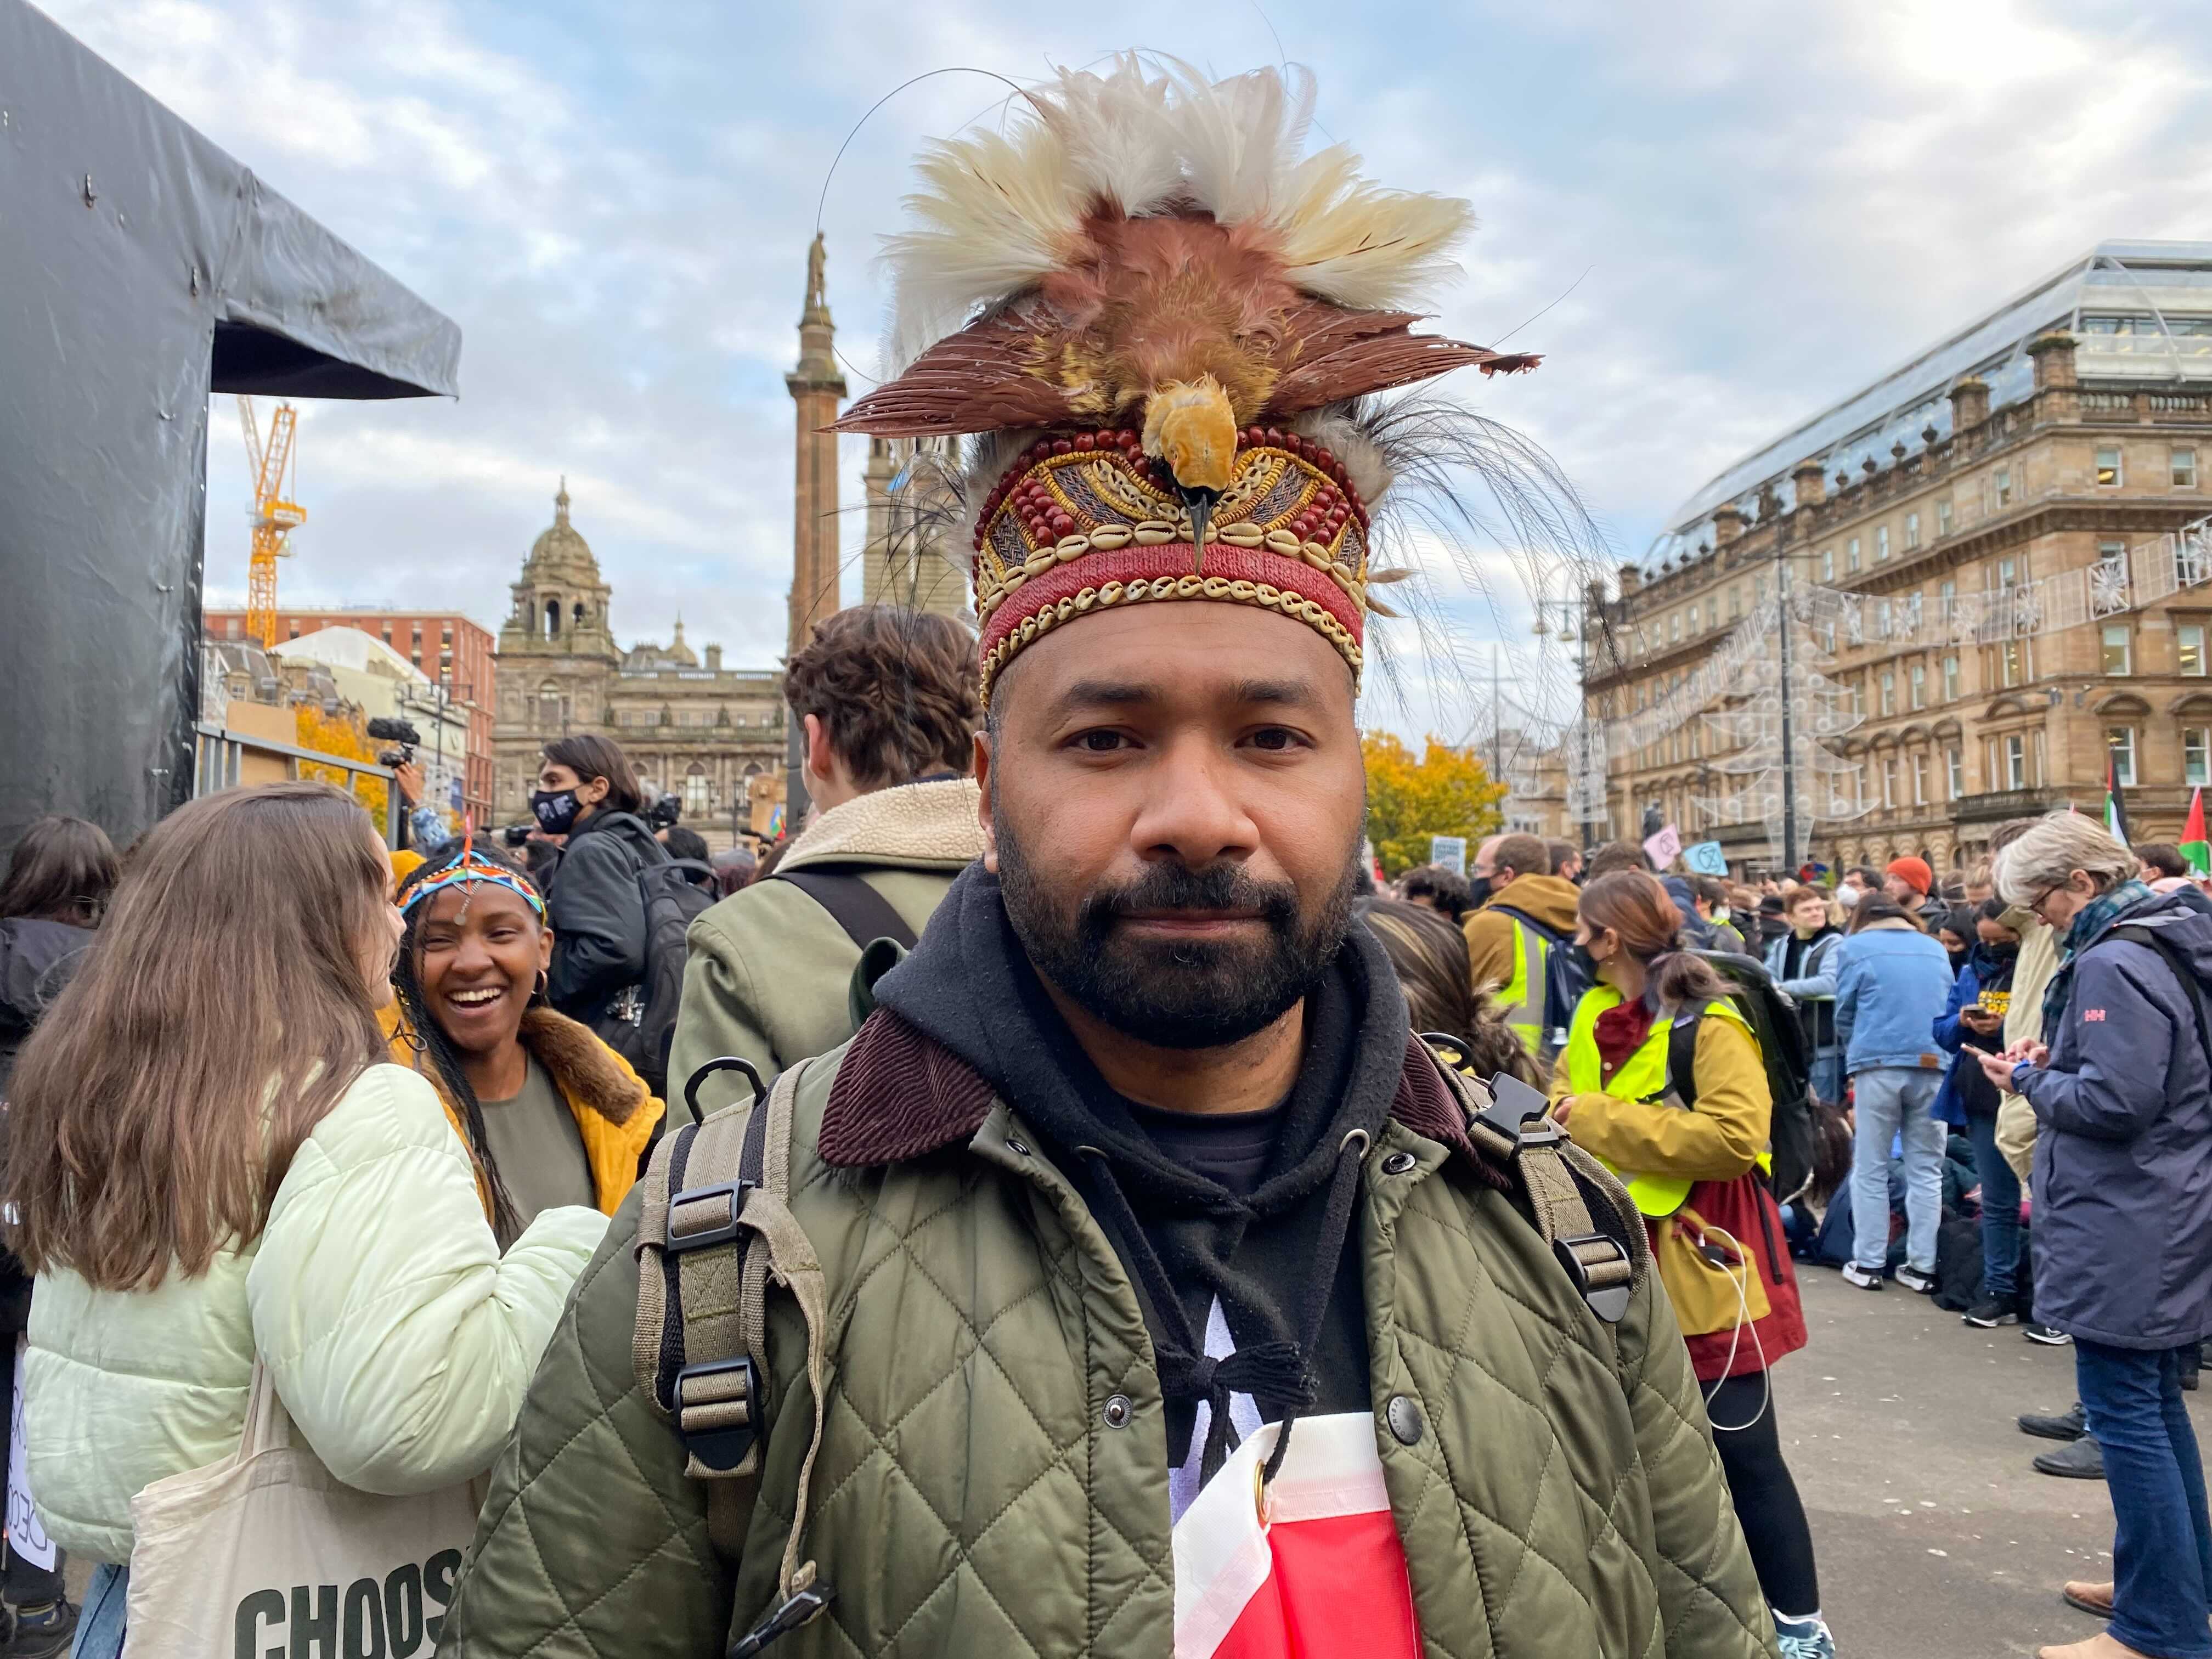 Raki Ap, 37, was one of the speakers addressing a crowd of climate activists in Glasgow on Friday.